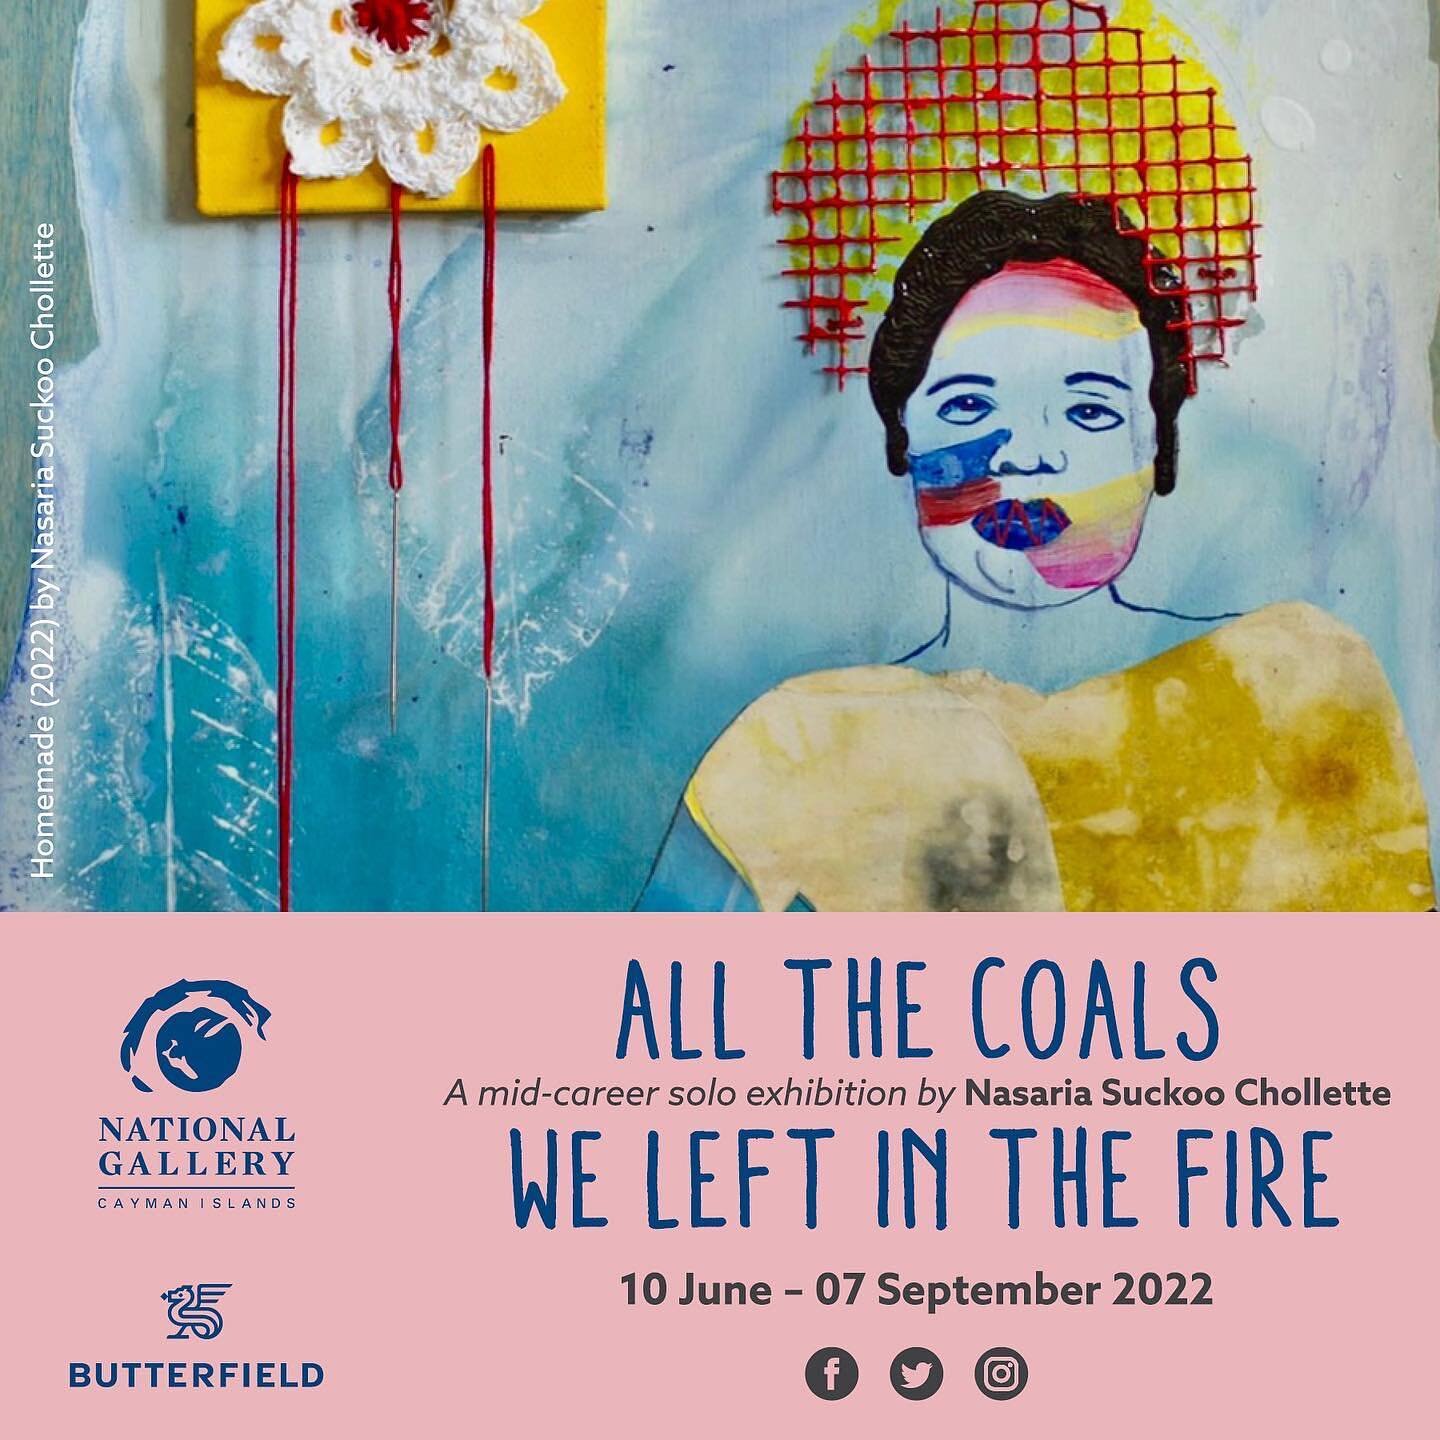 Back as a lead partner for @caymanartweek, the National Gallery of the Cayman Islands is delighted to launch two significant new exhibitions in time for CAW 2022. &lsquo;All the Coals We Left in the Fire&rsquo; is a mid career solo exhibition artist 